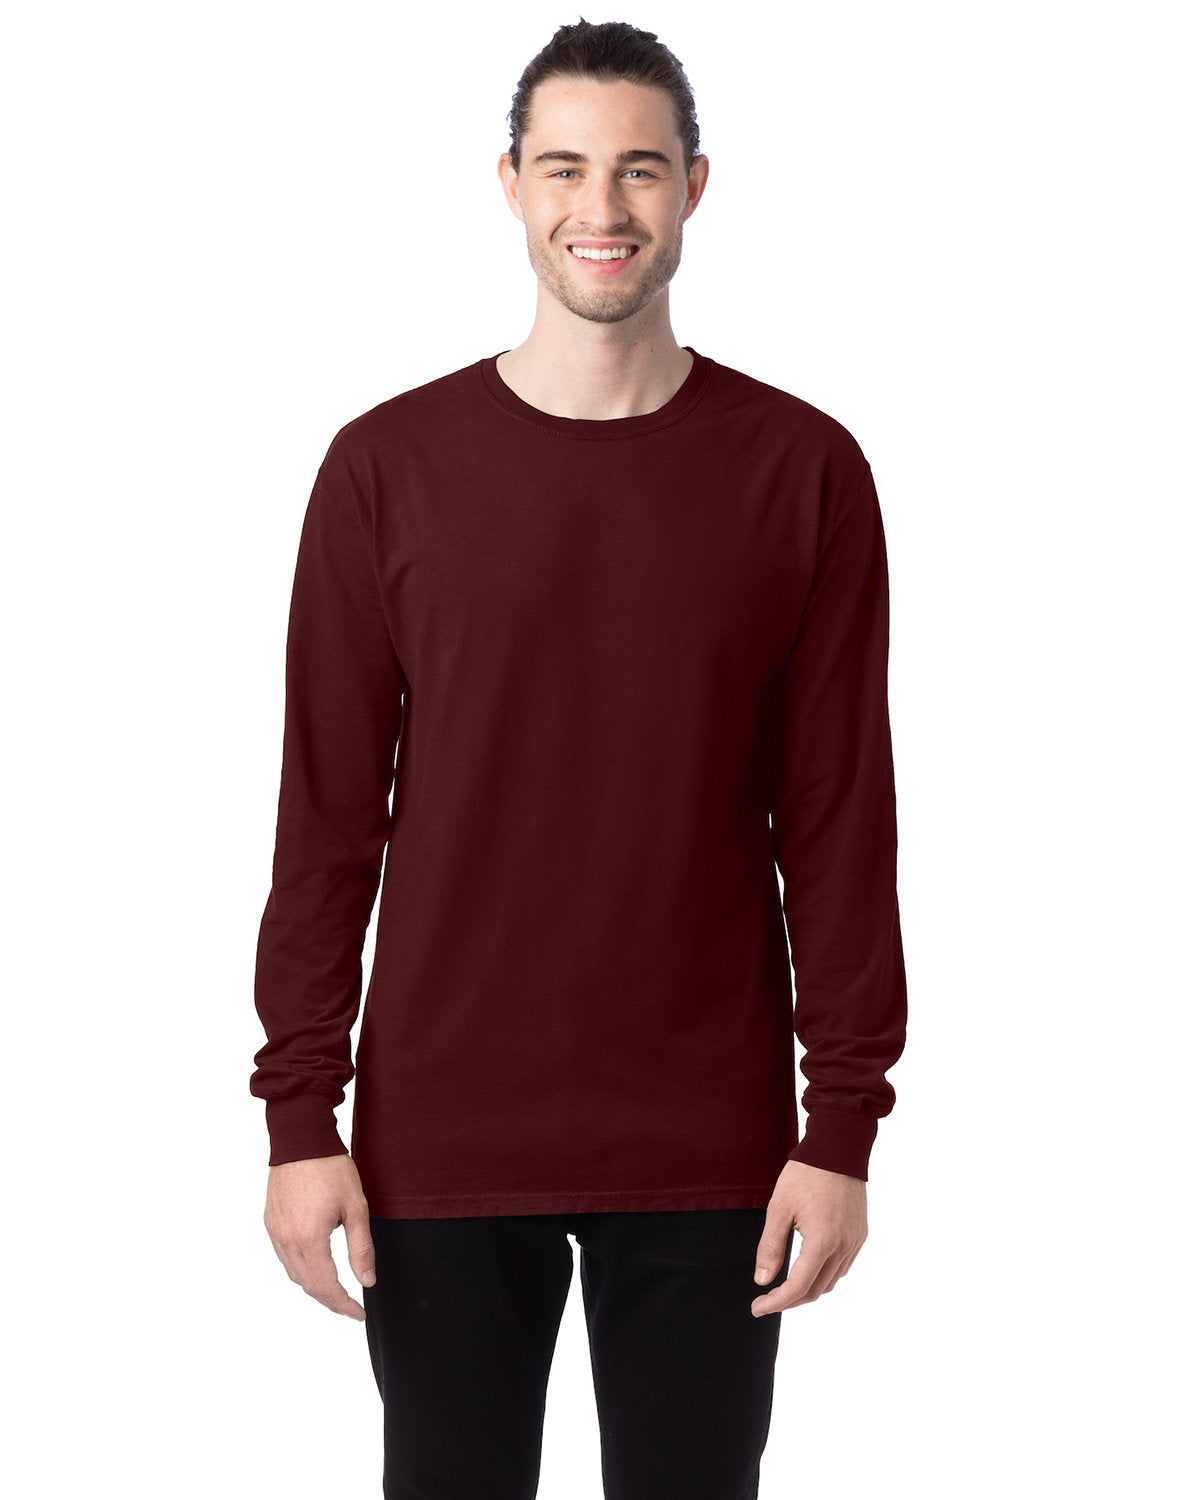 GDH200-CWH-60-MAROON-S